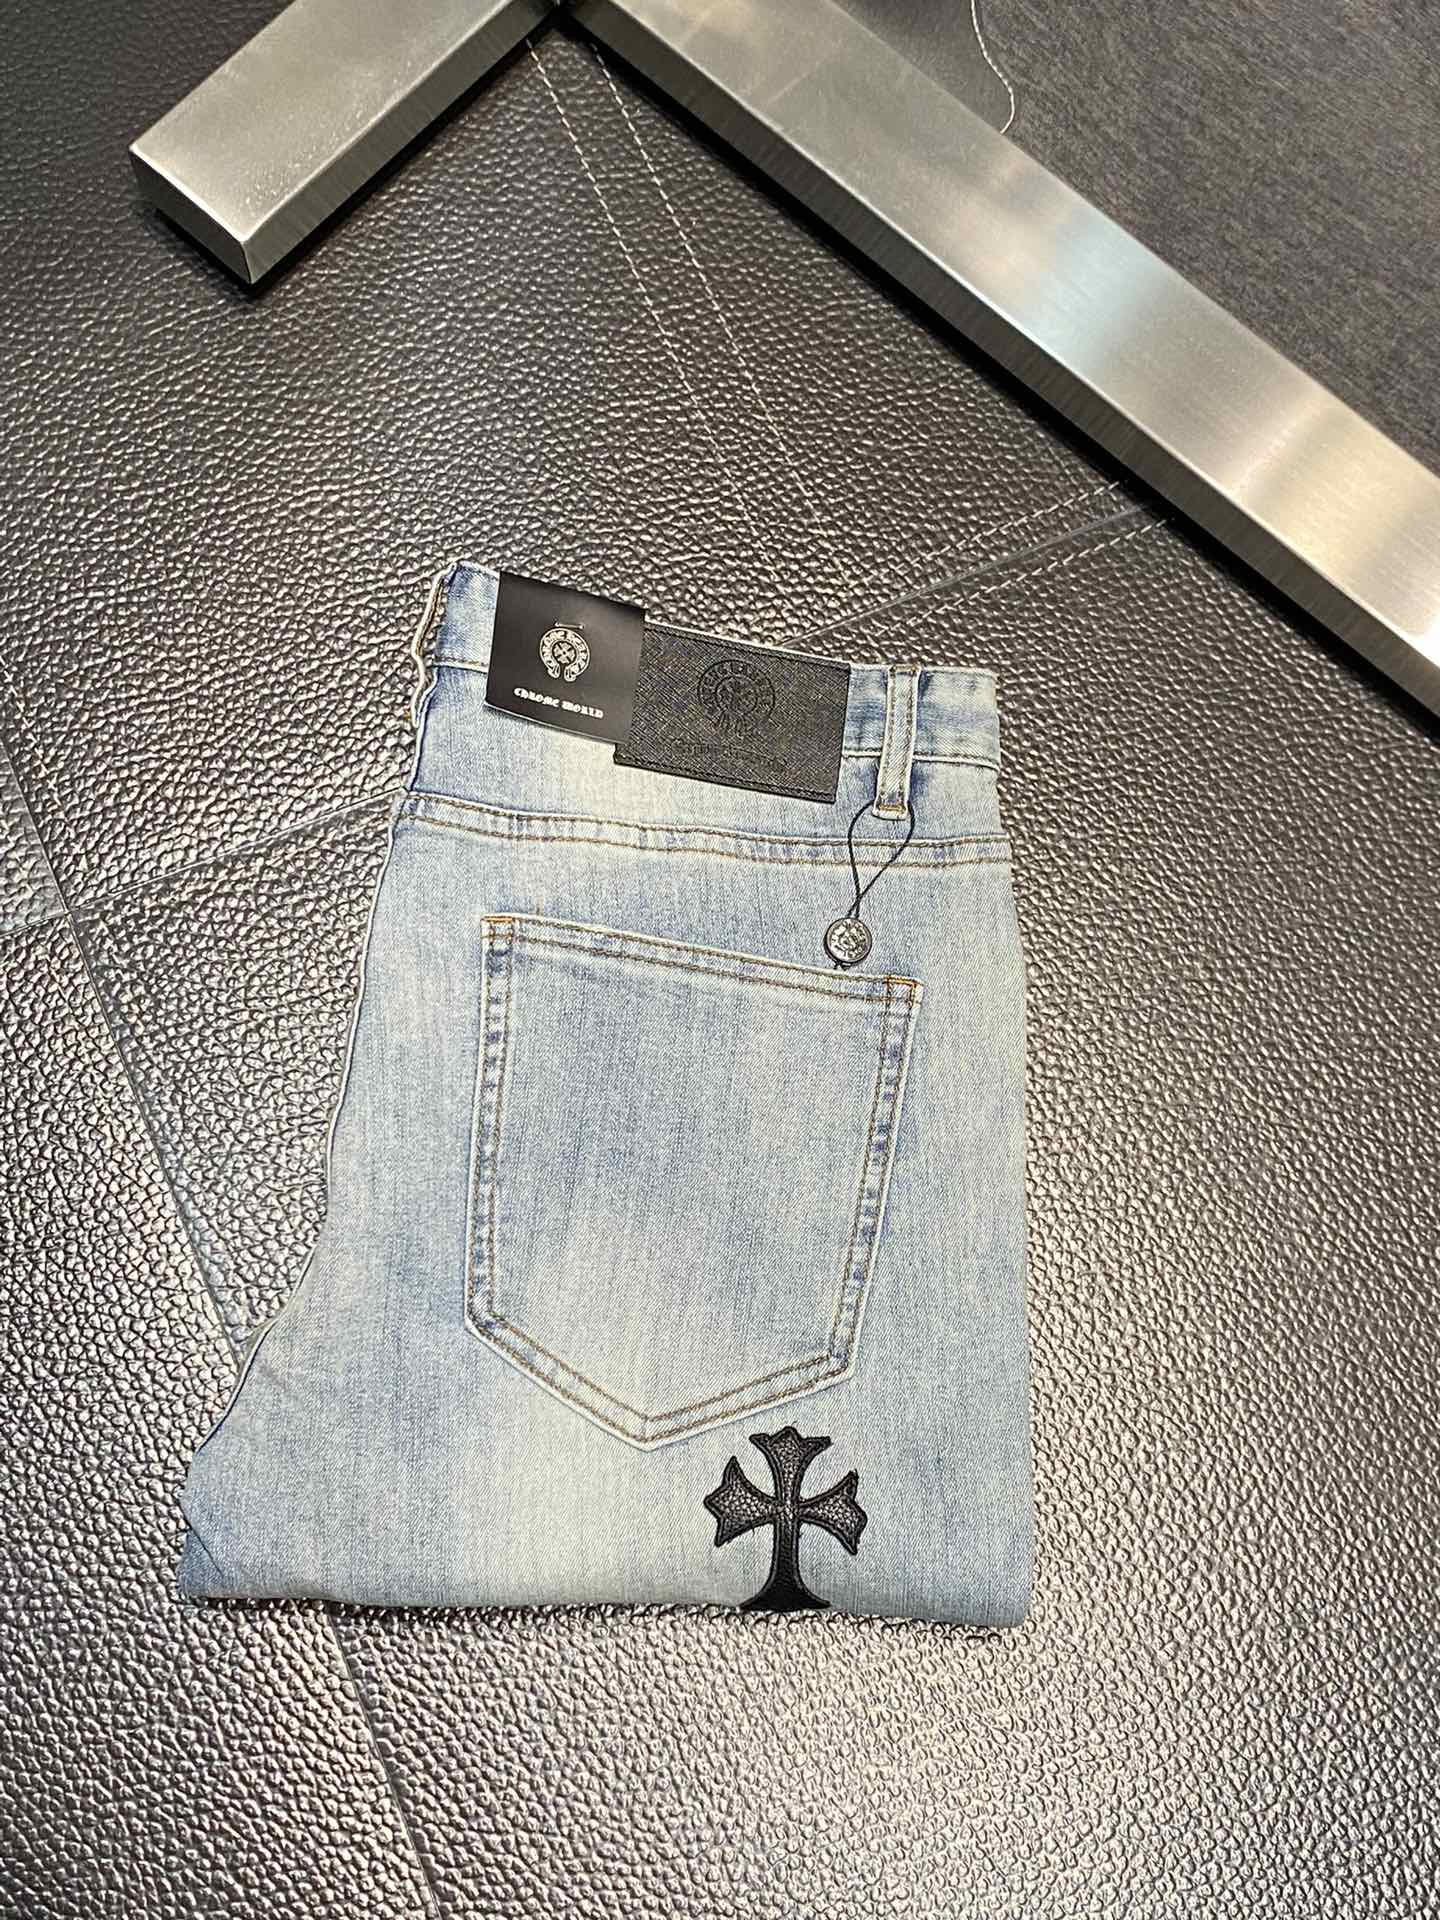 Chrome Hearts Clothing Jeans from China 2023
 Casual